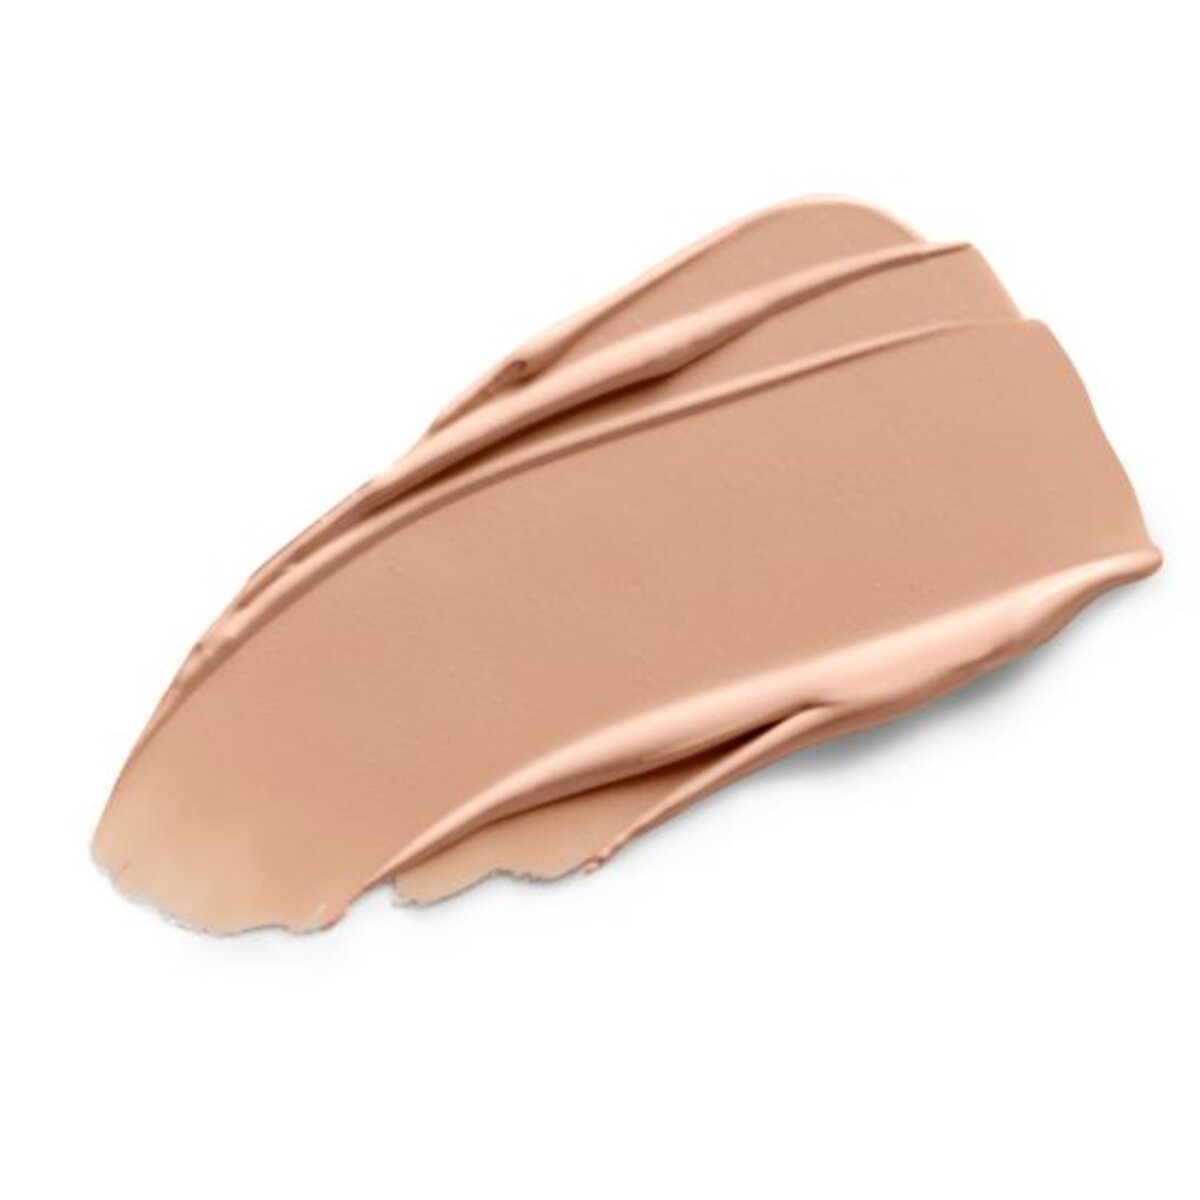 BUTTER BELIEVE IT FOUNDATION AND CONCEALER FAIR TO LIGHT - PHYSICIANS FORMULA